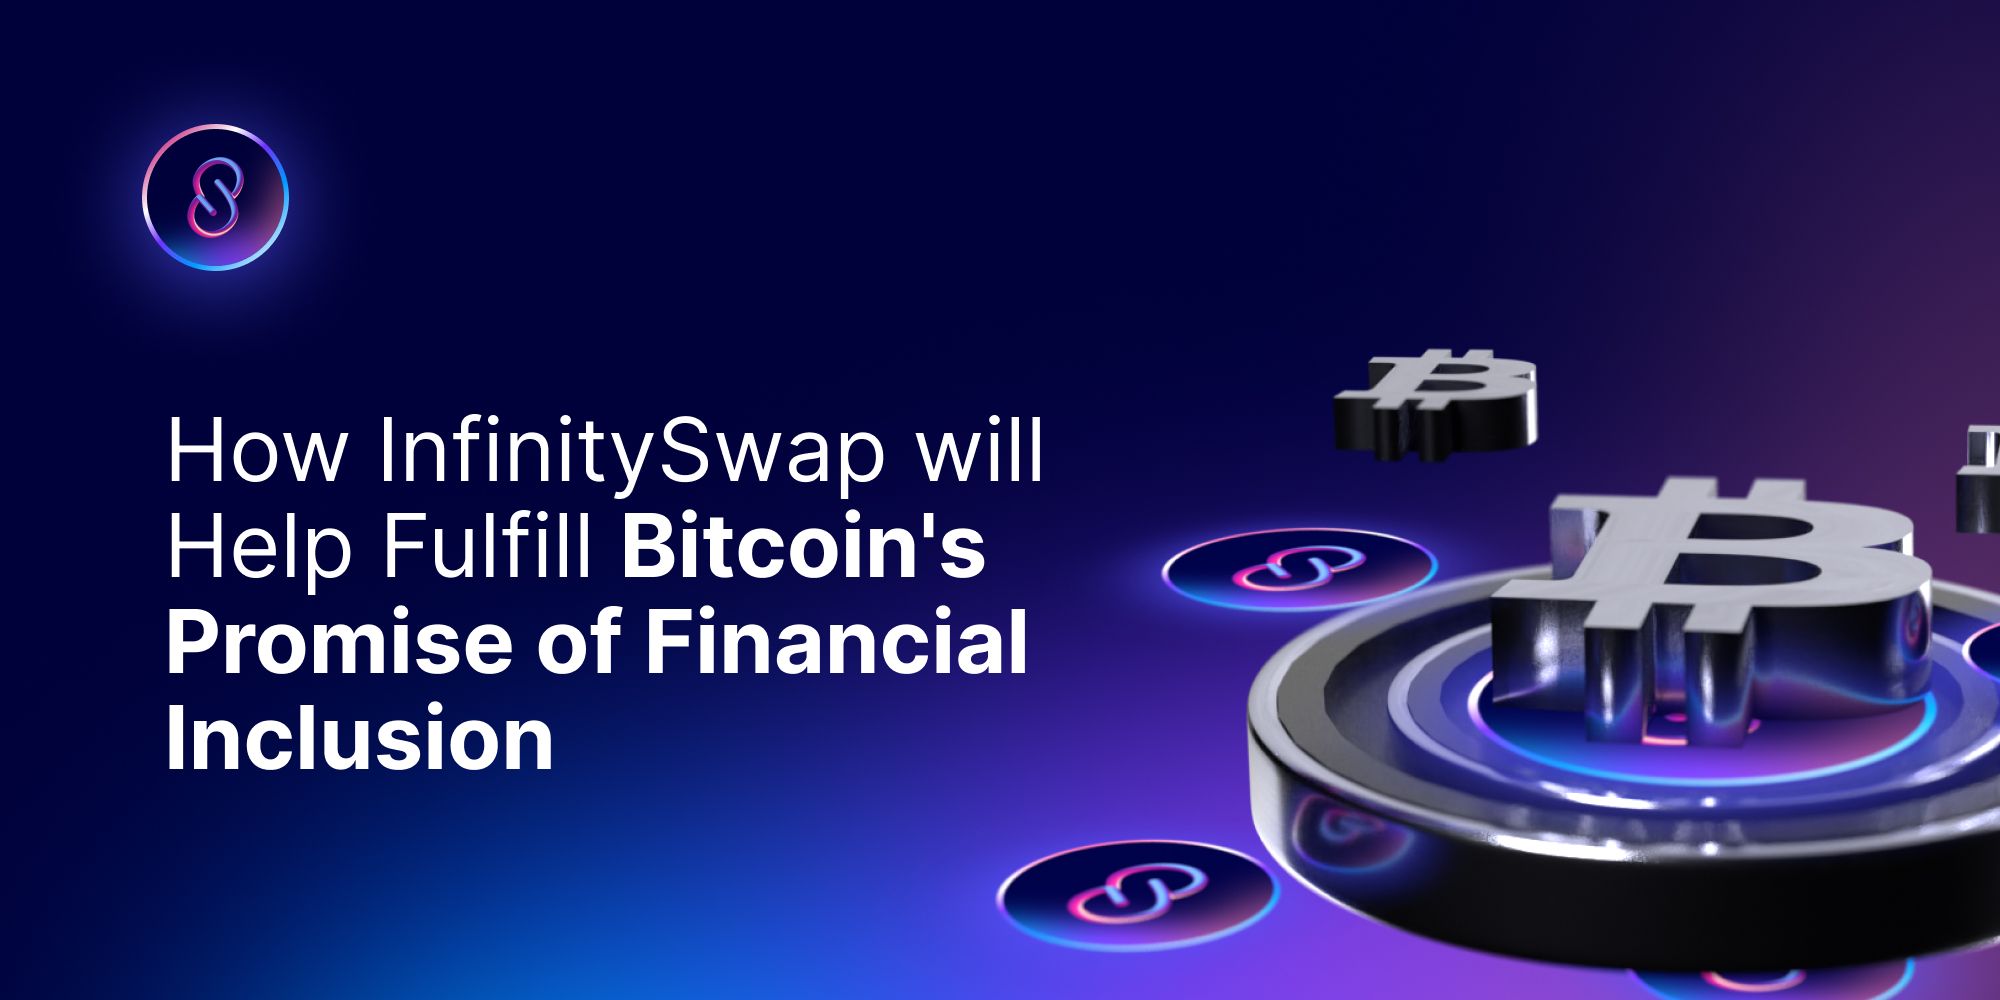 How InfinitySwap will Help Fulfill Bitcoin's Promise of Financial Inclusion